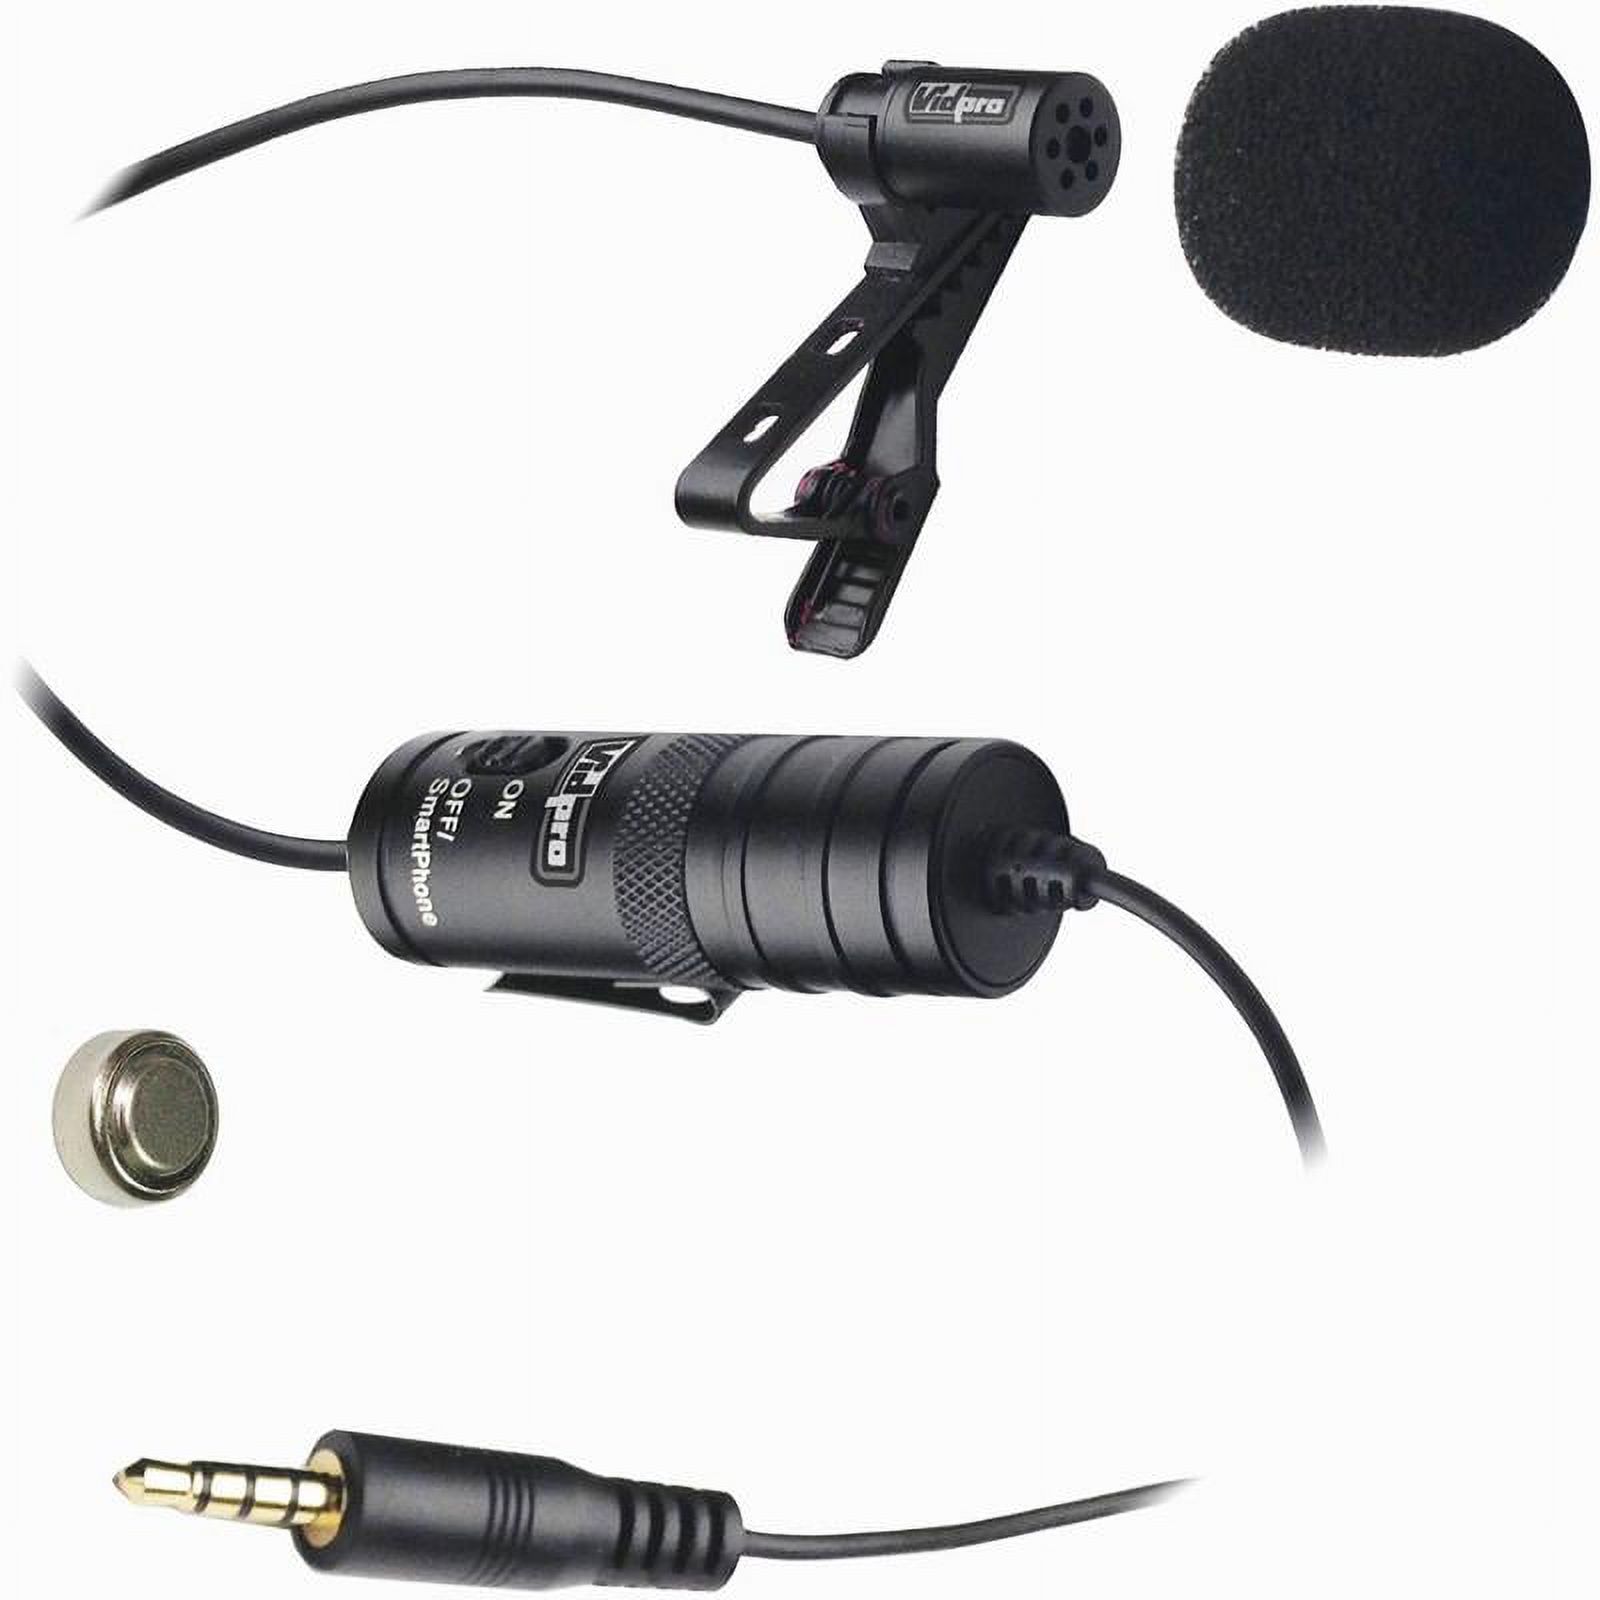 Panasonic Lumix DMC-GH5 Digital Camera External Microphone Vidpro XM-L Wired Lavalier microphone - 20' Audio Cable - Transducer type: Electret Condenser - image 2 of 2